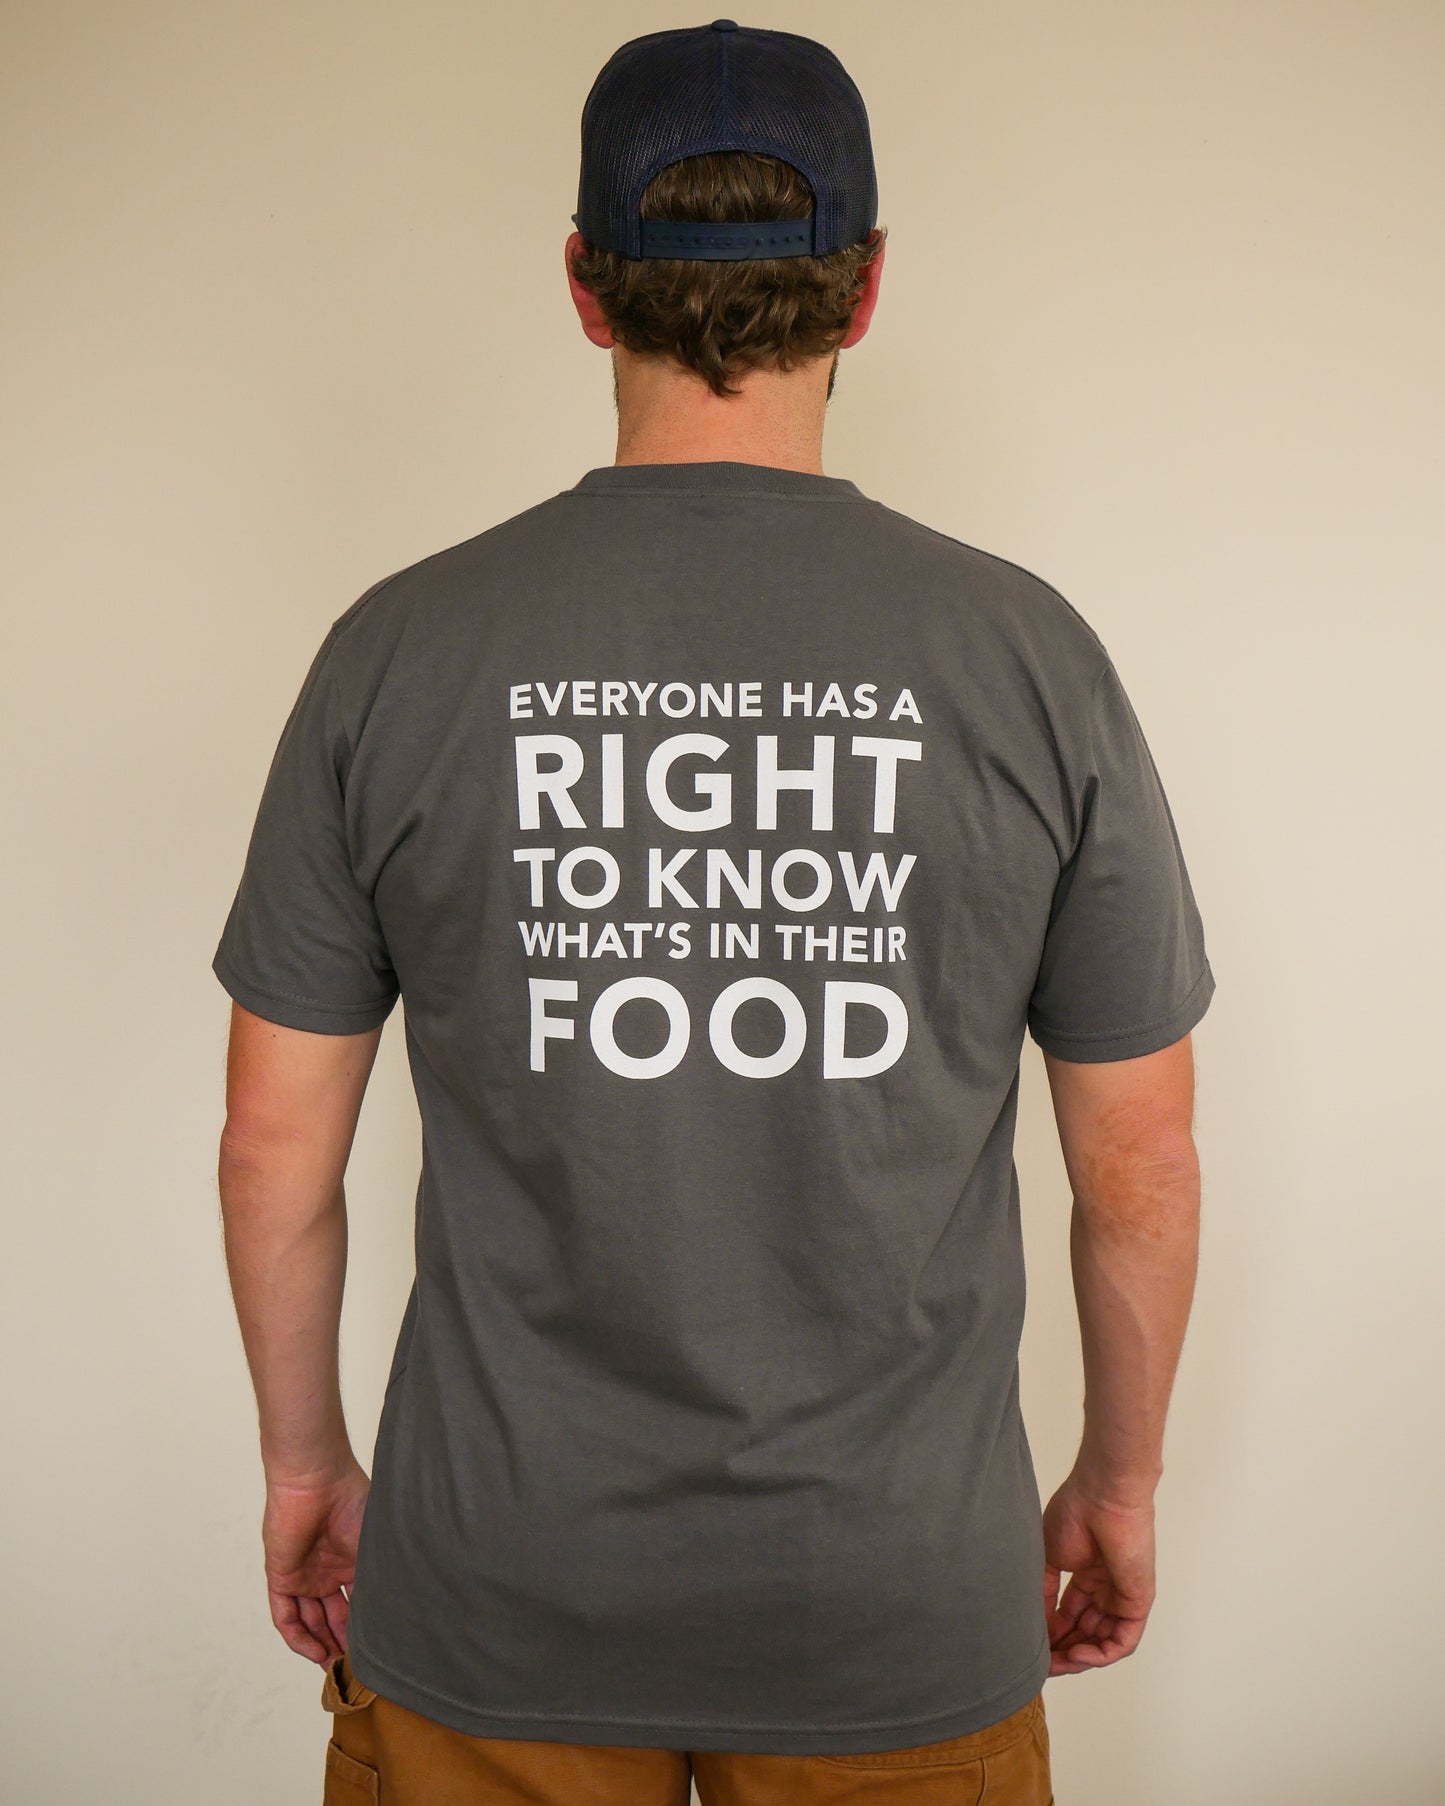 Non-GMO Project gray t-shirt back with quote "Everyone has a right to know what's in their food"